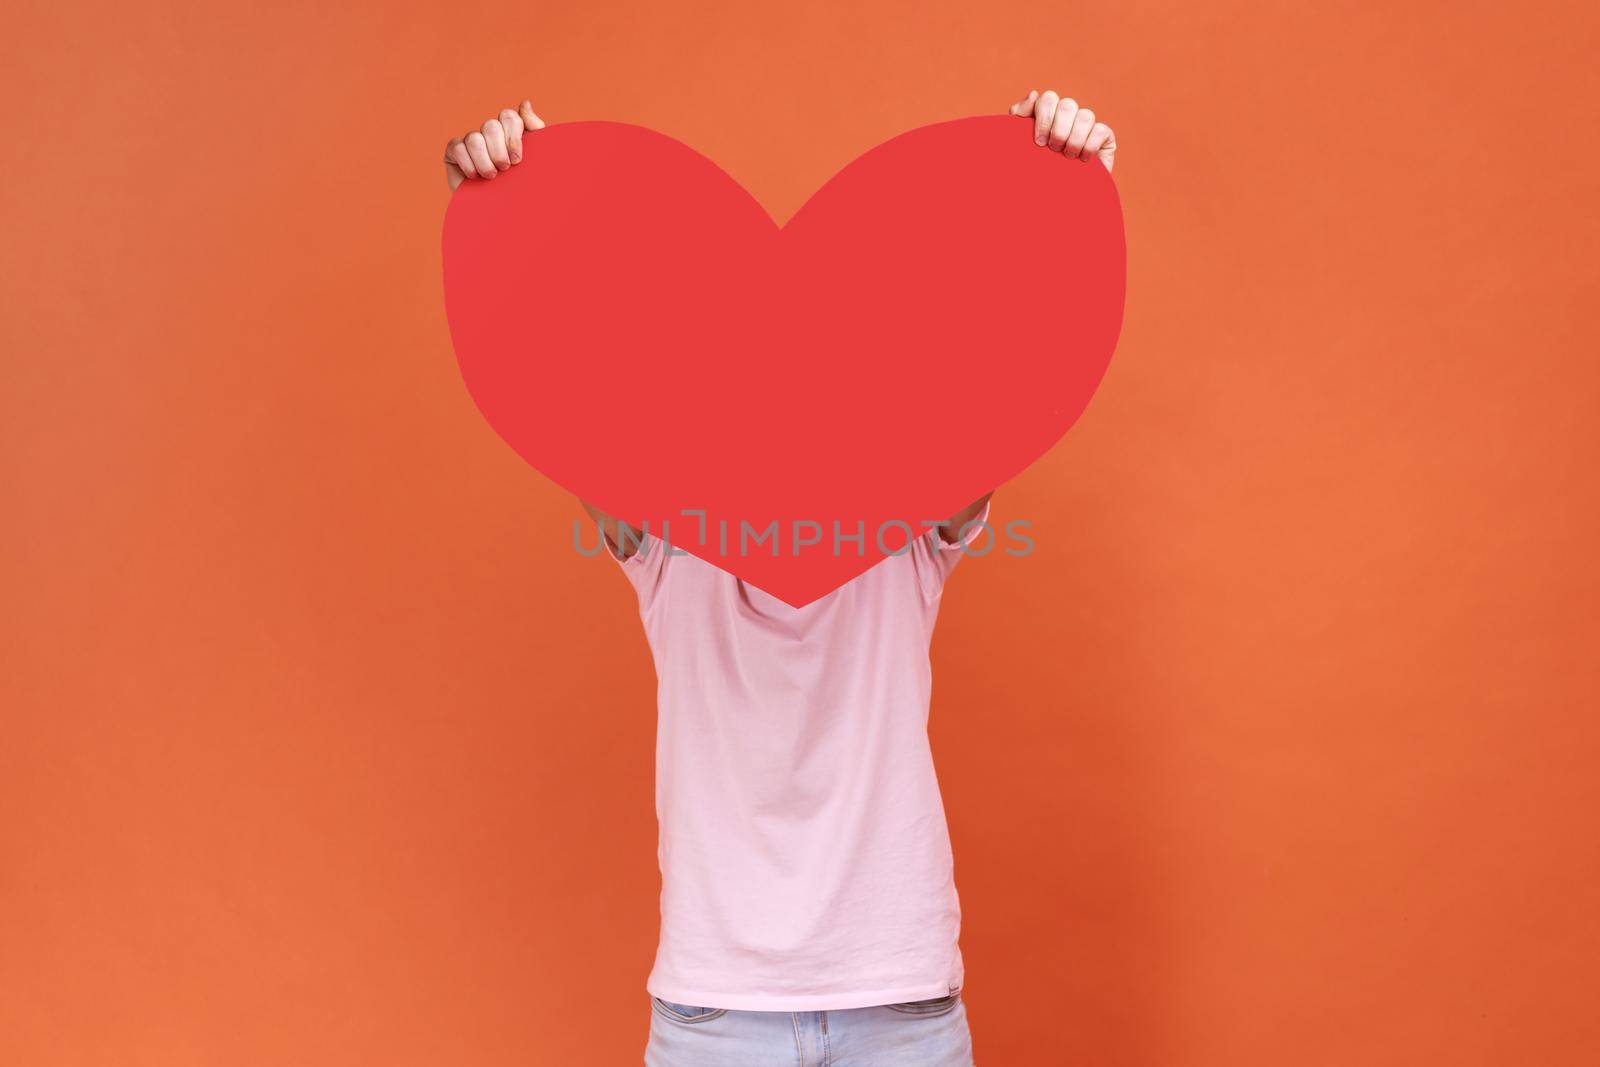 Portrait of anonymous bearded man hiding behind big red heart, holding symbol of love and affection, large greeting card, wearing pink T-shirt. Indoor studio shot isolated on orange background.